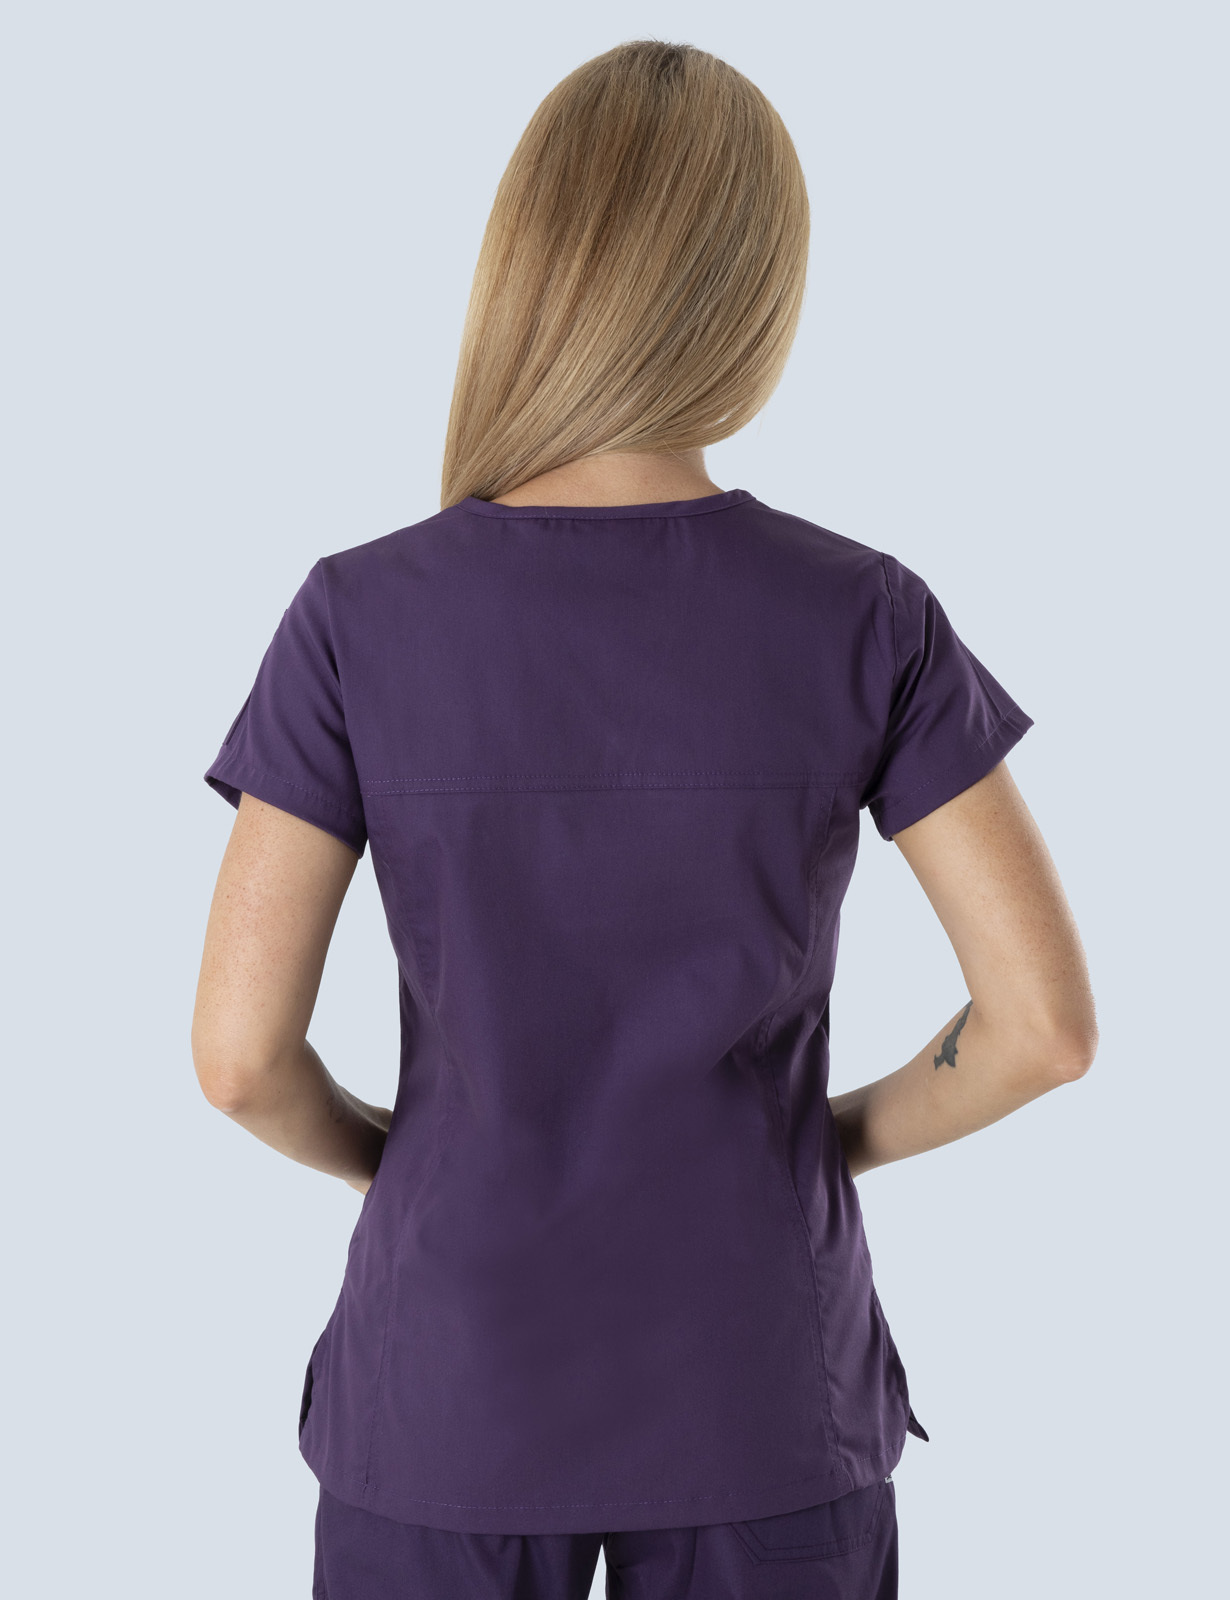 Women's Fit Solid Scrub Top - Aubergine - Large